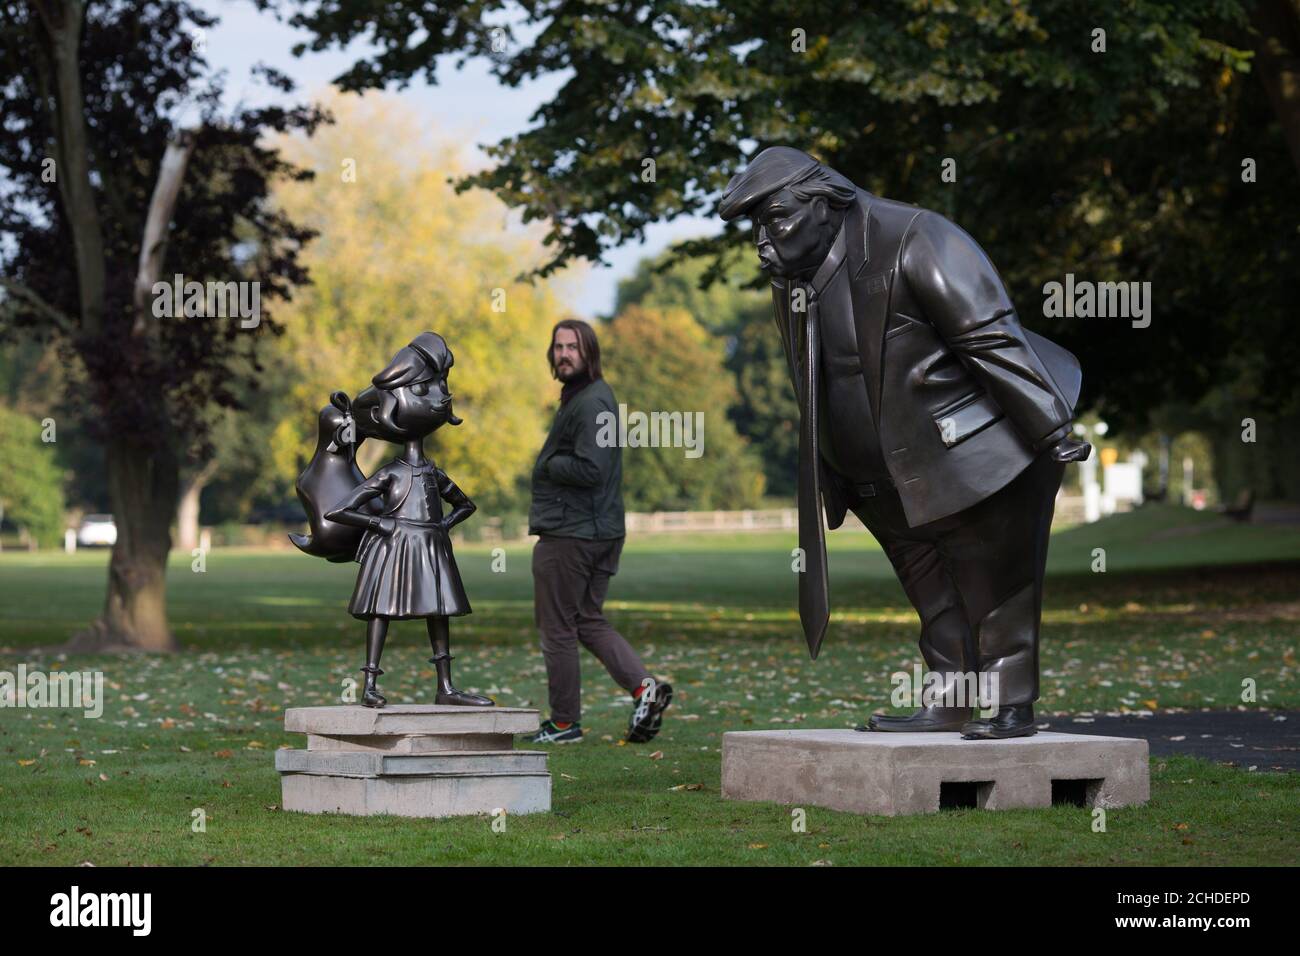 A statue of Roald Dahl's Matilda is unveiled in Great Missenden in Buckinghamshire, alongside one of President Donald Trump, to celebrate the 30th Anniversary of Matilda the novel. Stock Photo